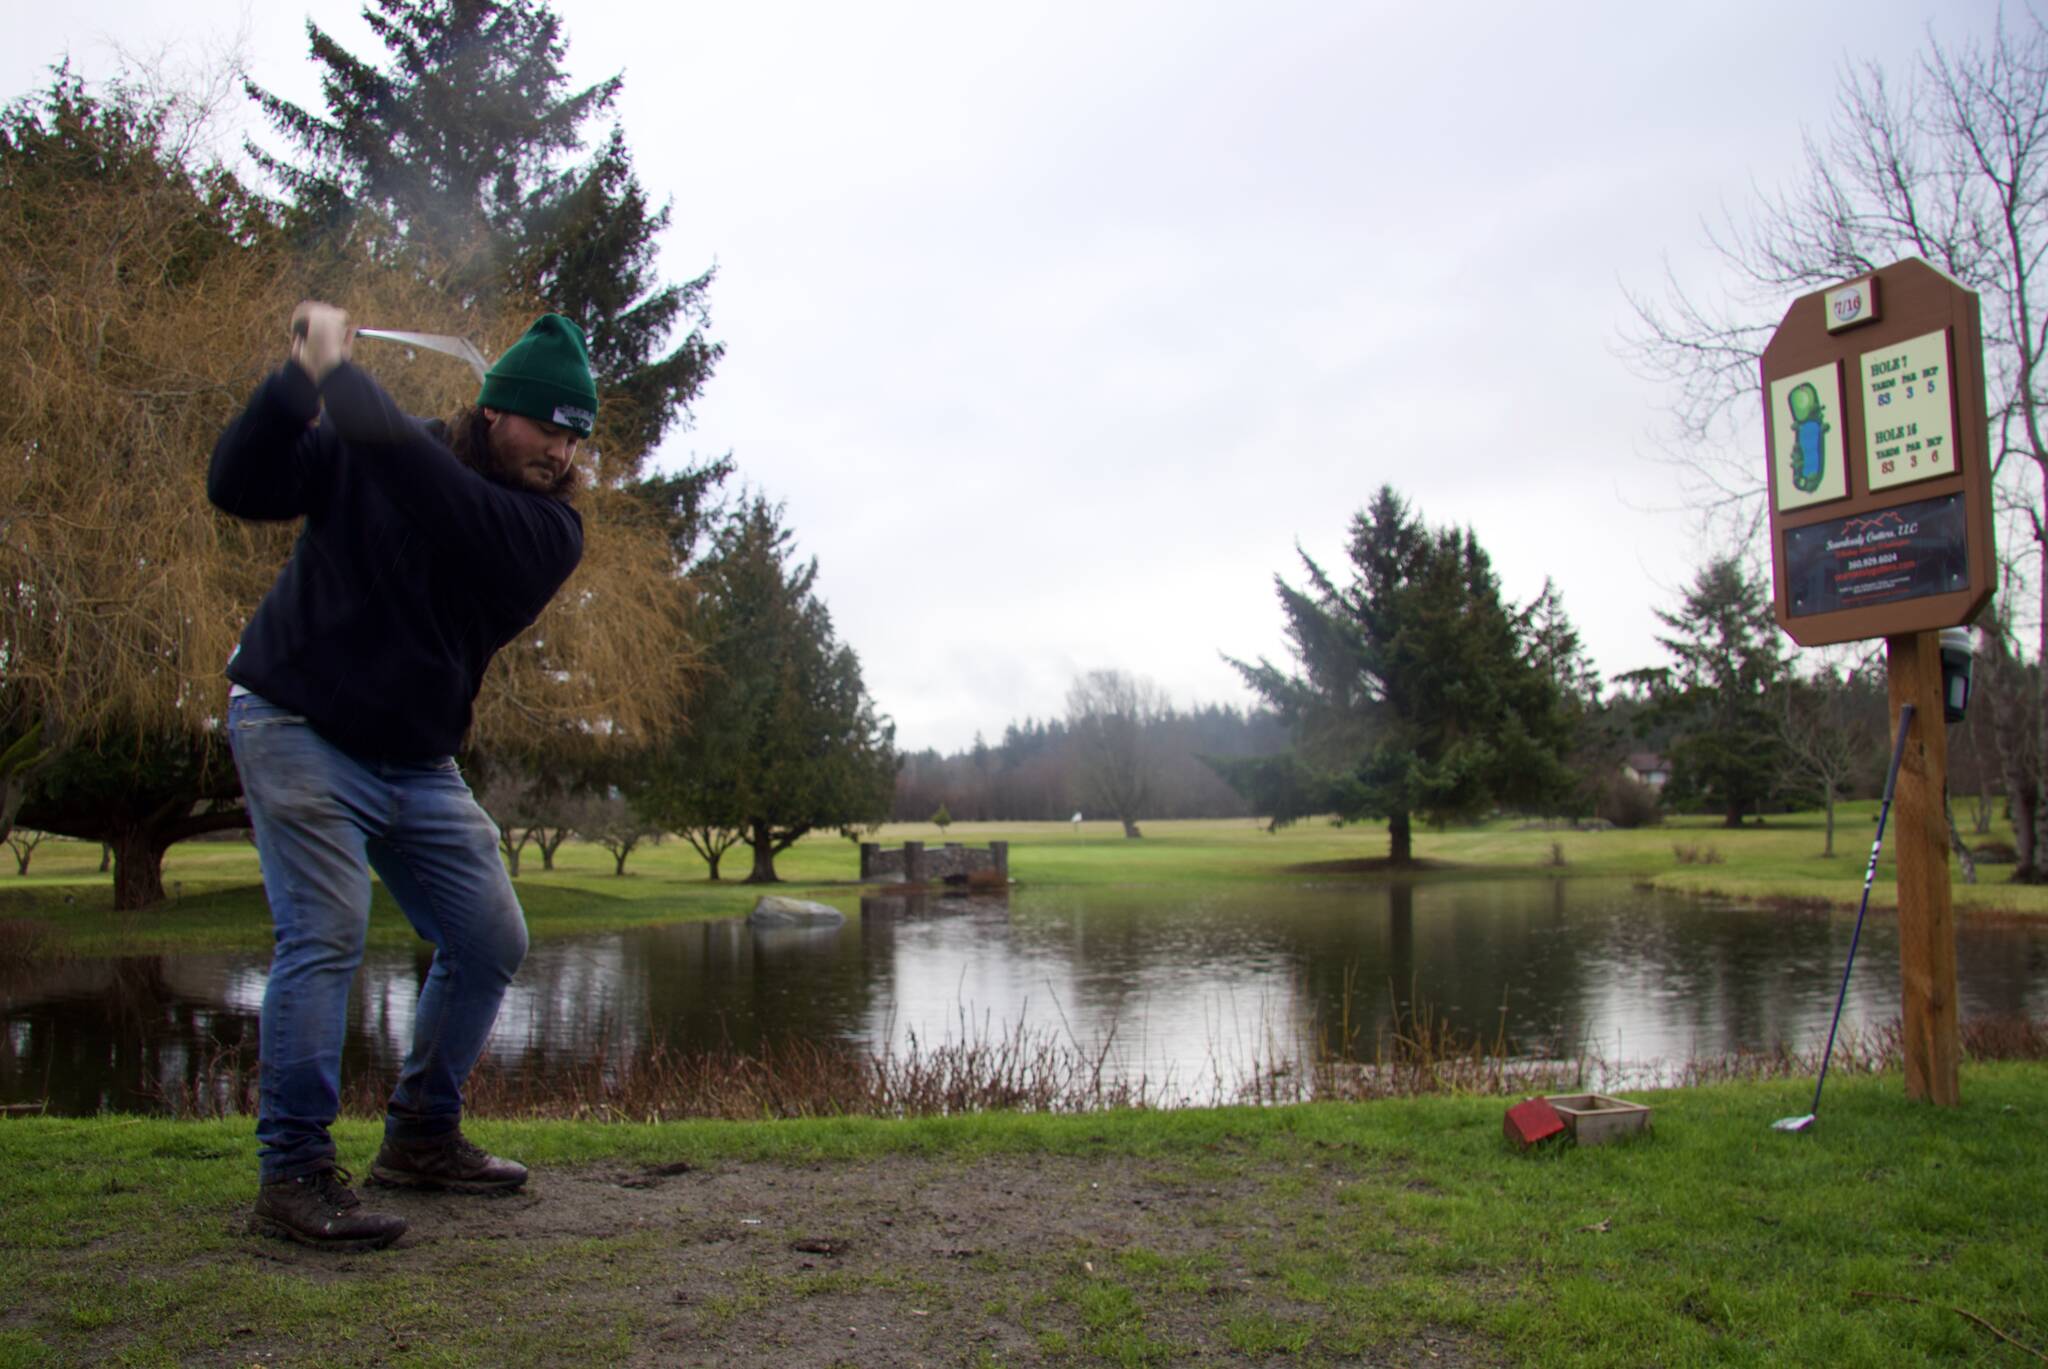 North Whidbey golf course tees up big plans | Whidbey News-Times